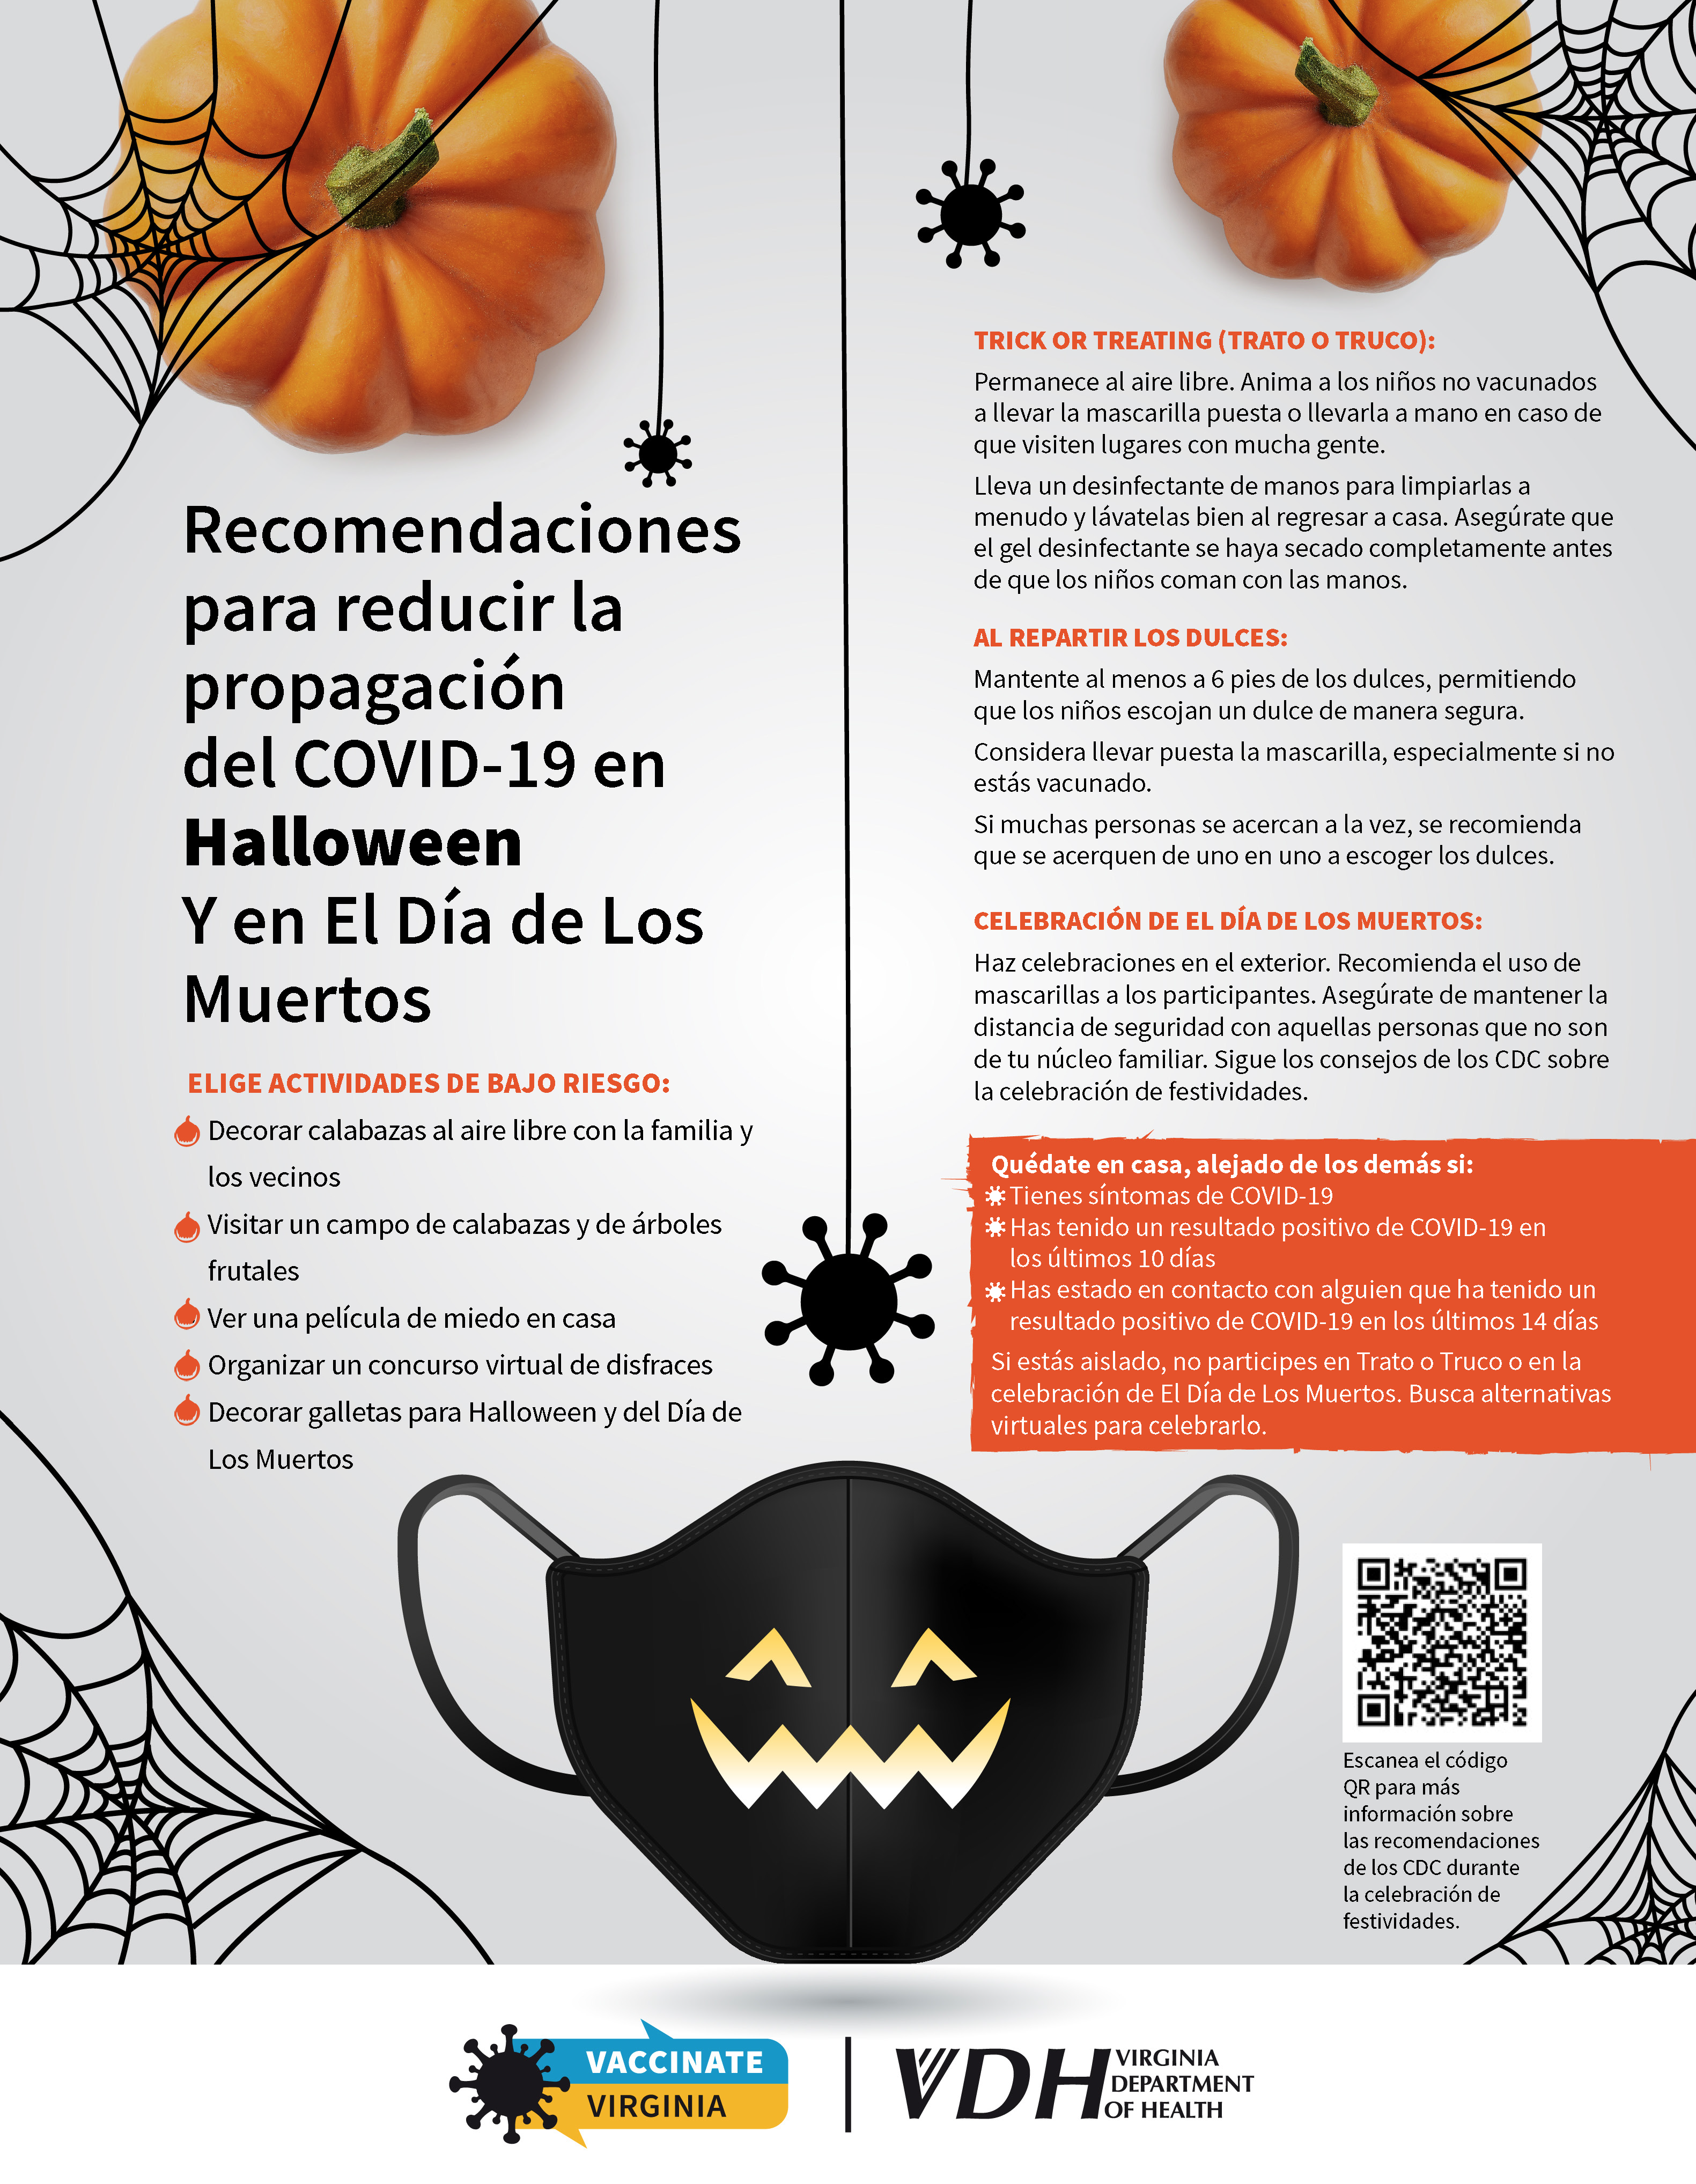 the image is a one-page handout highlighting the VDH's tips on celebrating halloween safely translated into Spanish